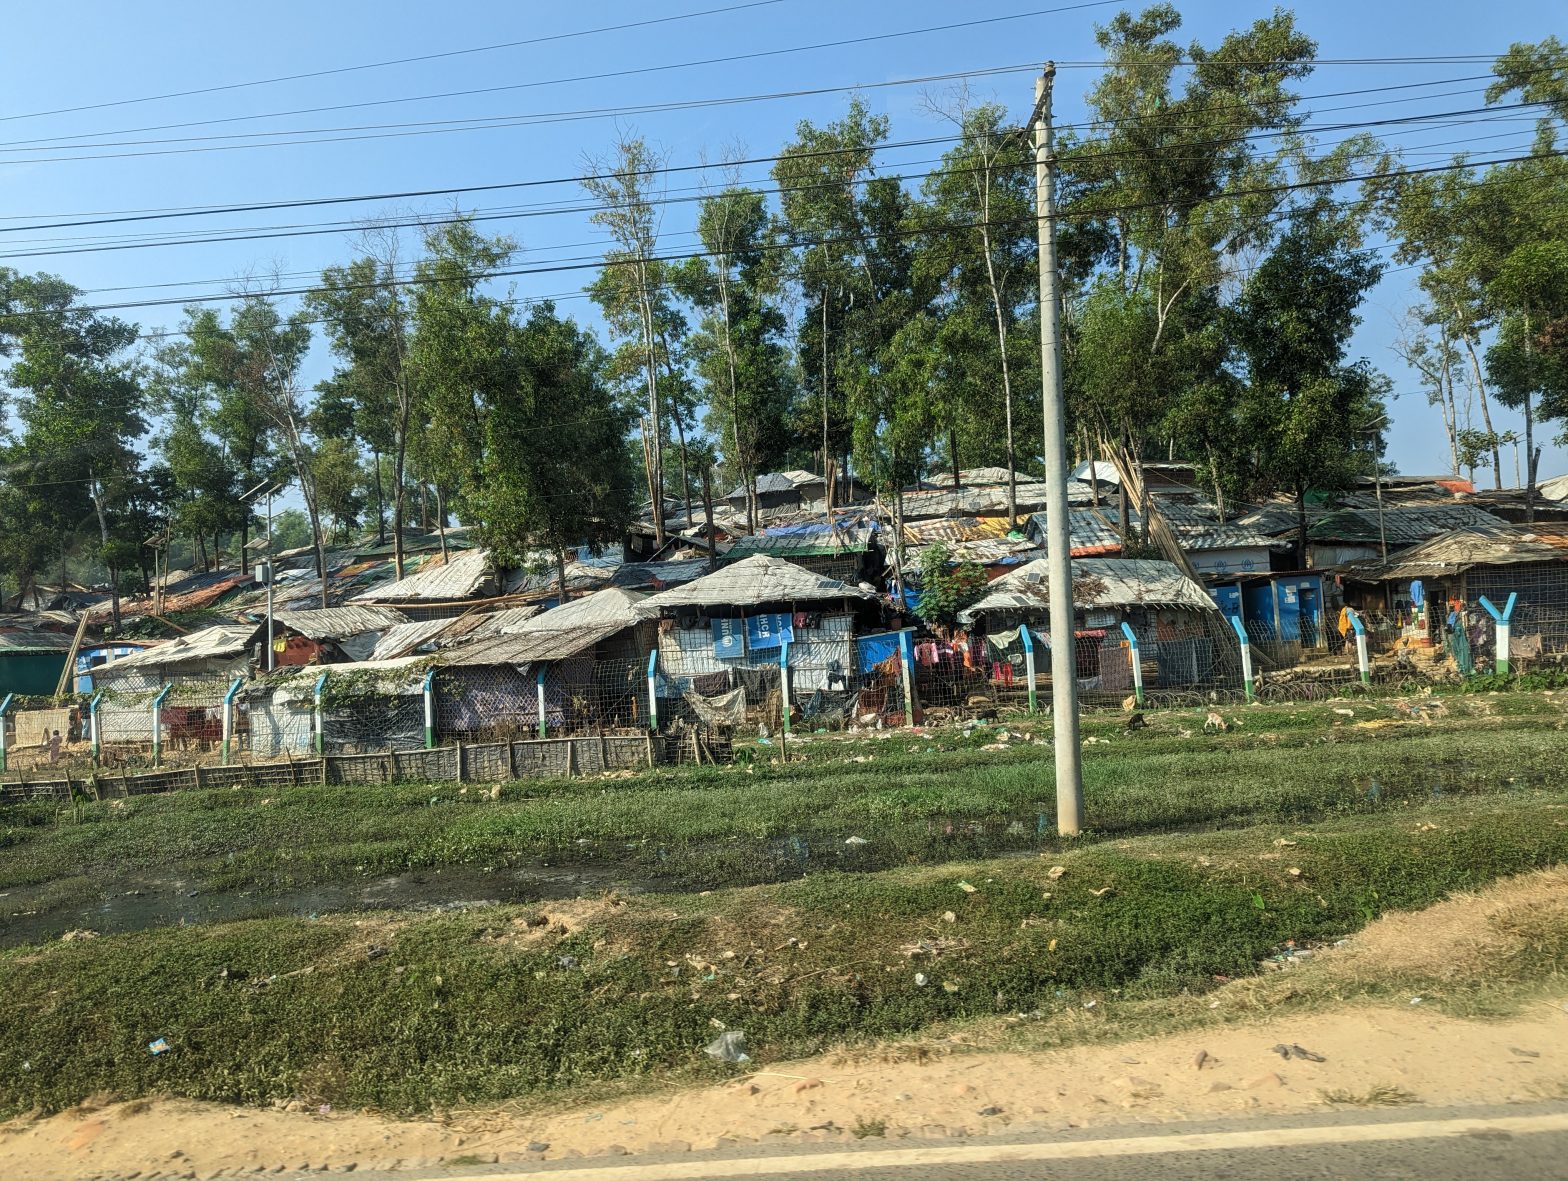 A Glimpse at Camp Life in Cox’s Bazar: Examining Aid Response and Distilling Solutions